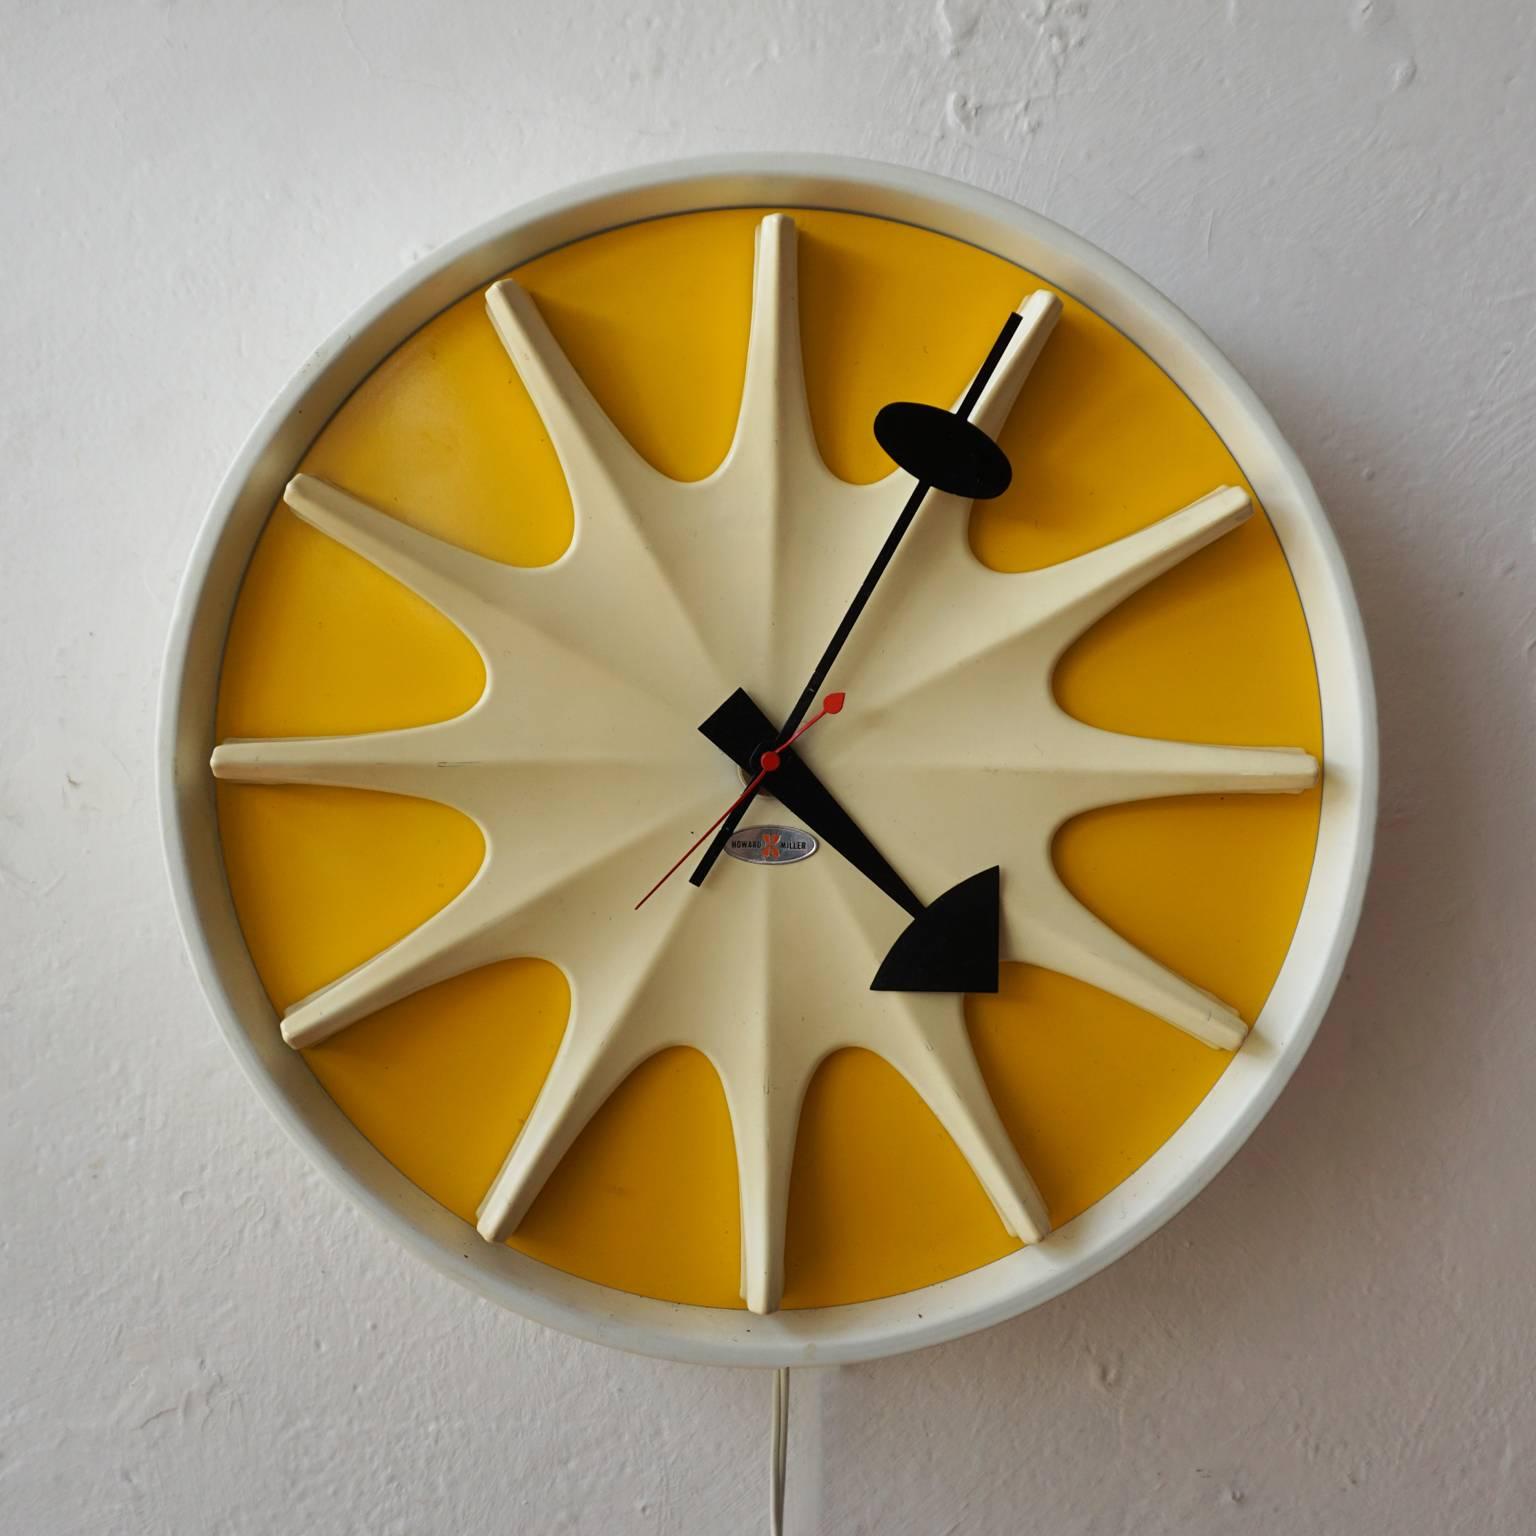 Irving Harper for George Nelson associates wall clock, model #2271-B. Produced by Howard Miller in 1959. Quiet plug in model, with second hand. All original.